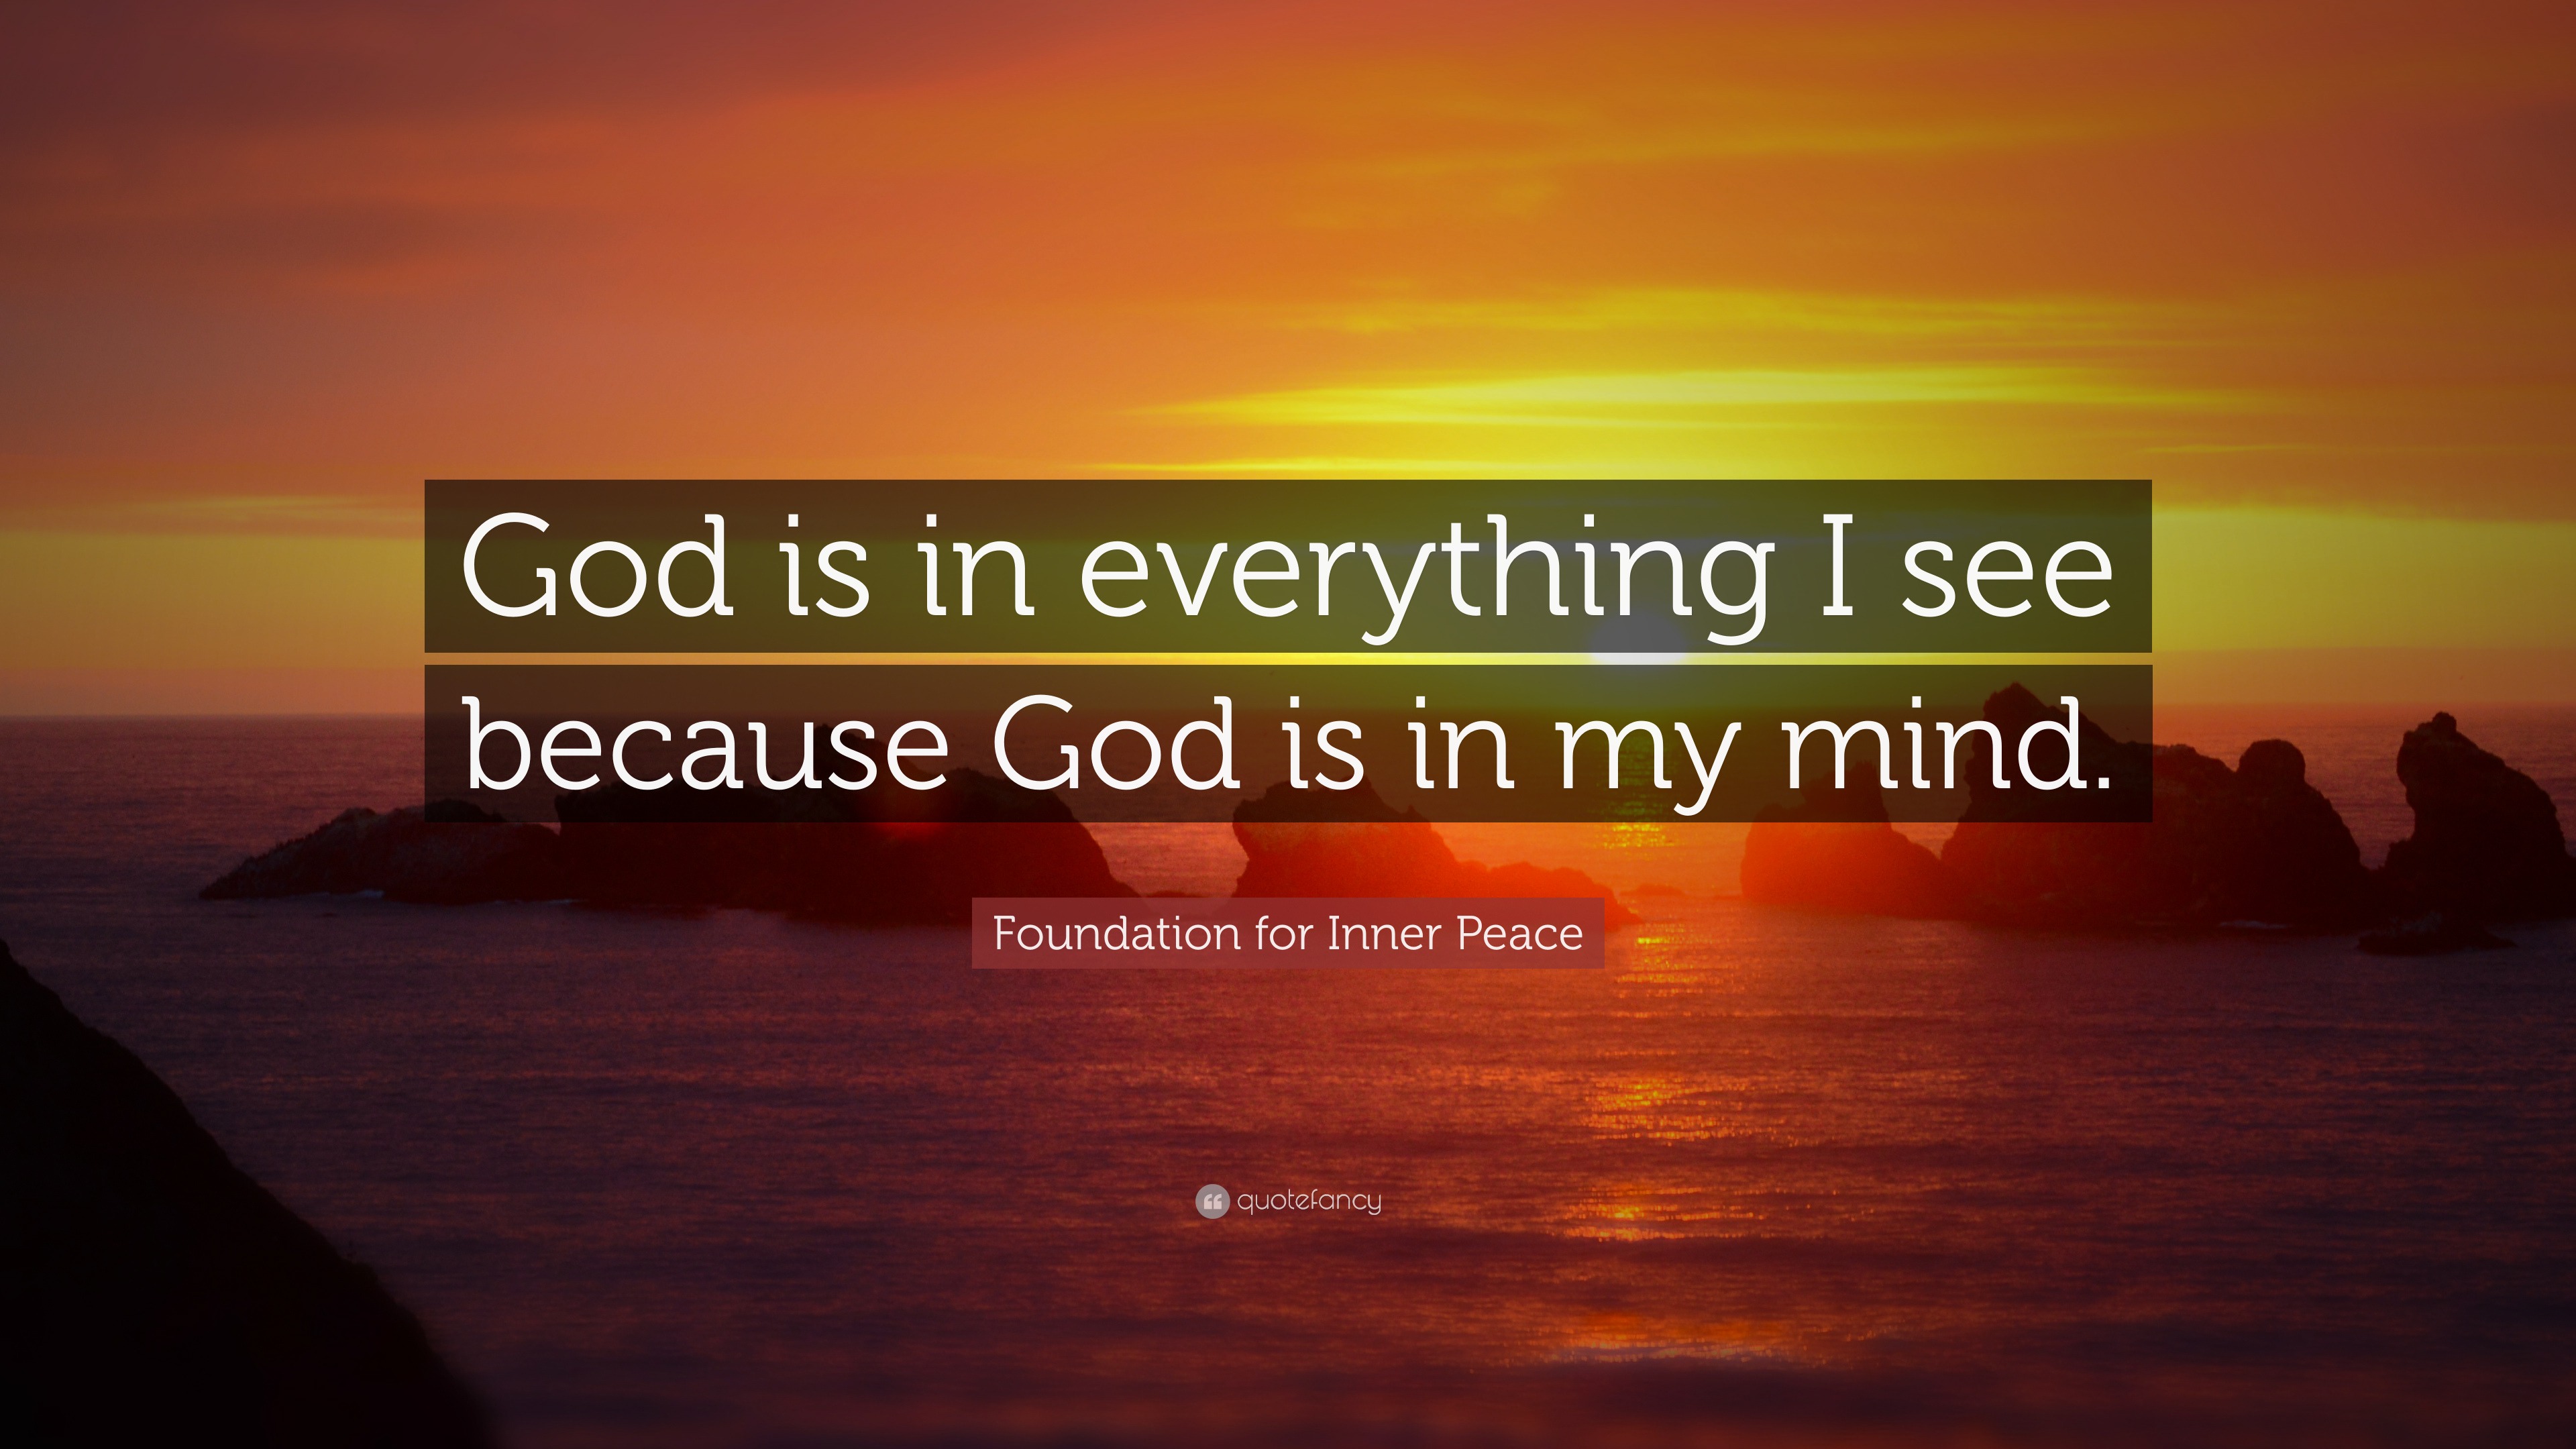 6531851 Foundation For Inner Peace Quote God Is In Everything I See 